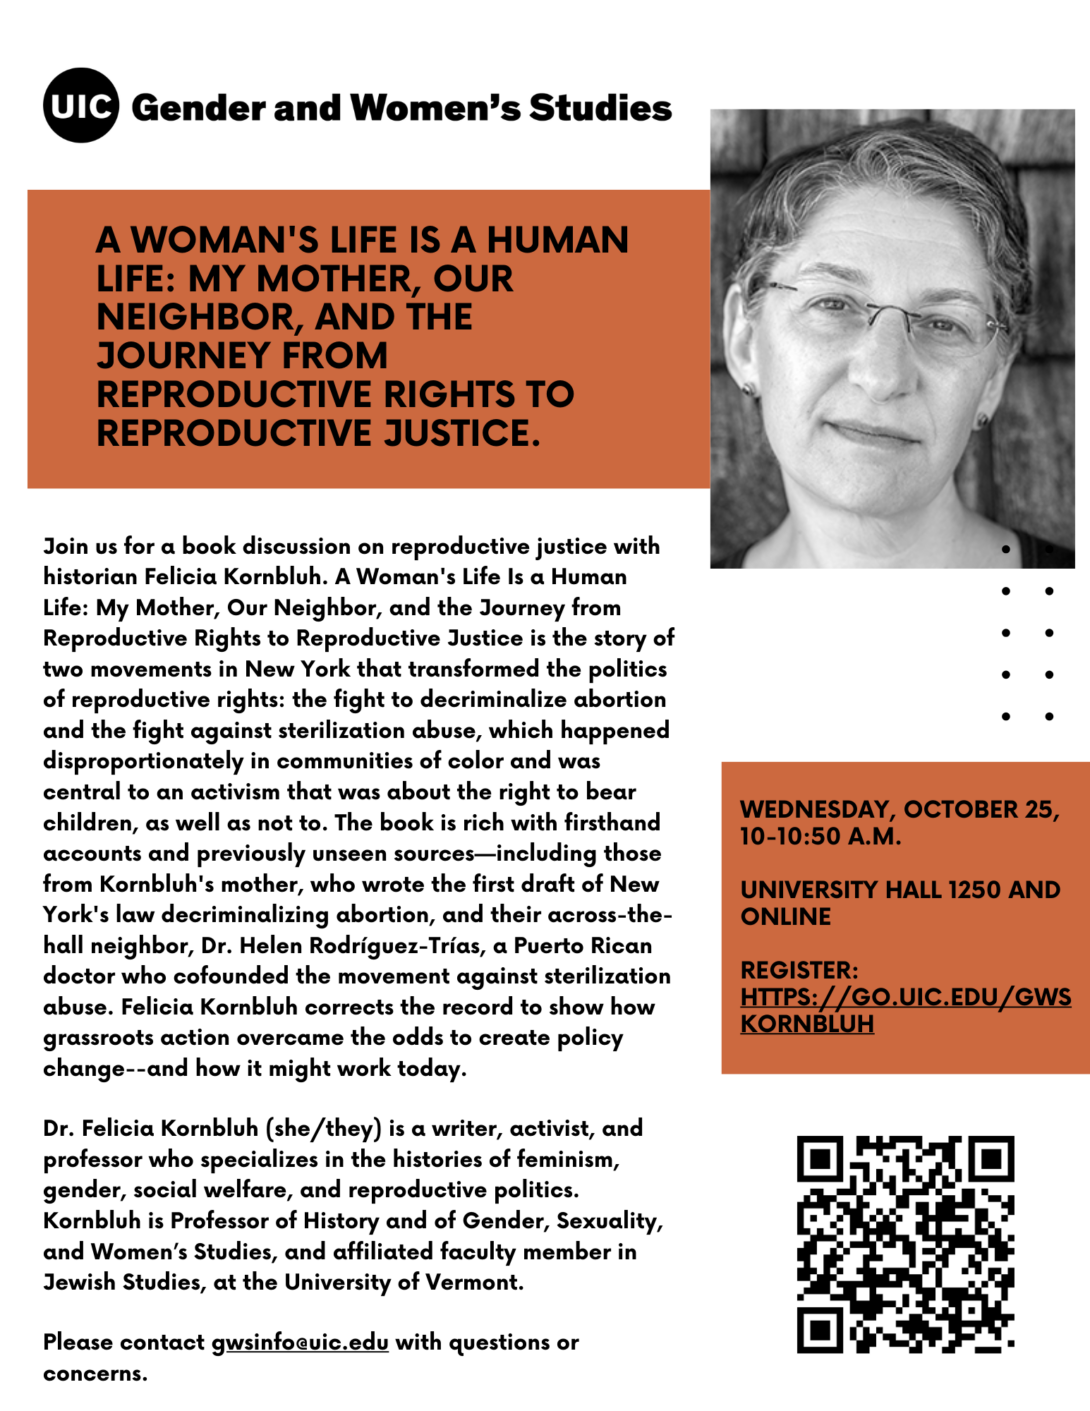 Event flyer with a black and white photo of Professor Felicia Kornbluh, wearing glasses and looking directly at the camera, in the upper right corner. The flyer background is white. At the top of the flyer is the UIC Gender and Women's Studies logo in black text. To the left of the headshot is an orange rectangle with the talk title in black text. Beneath the headshot is an orange rectangle with event date, time, location, and registration link. A QR code to register is at the bottom right corner of the flyer. Beneath the talk title is a long description of the talk and Professor Kornbluh in bold black text.